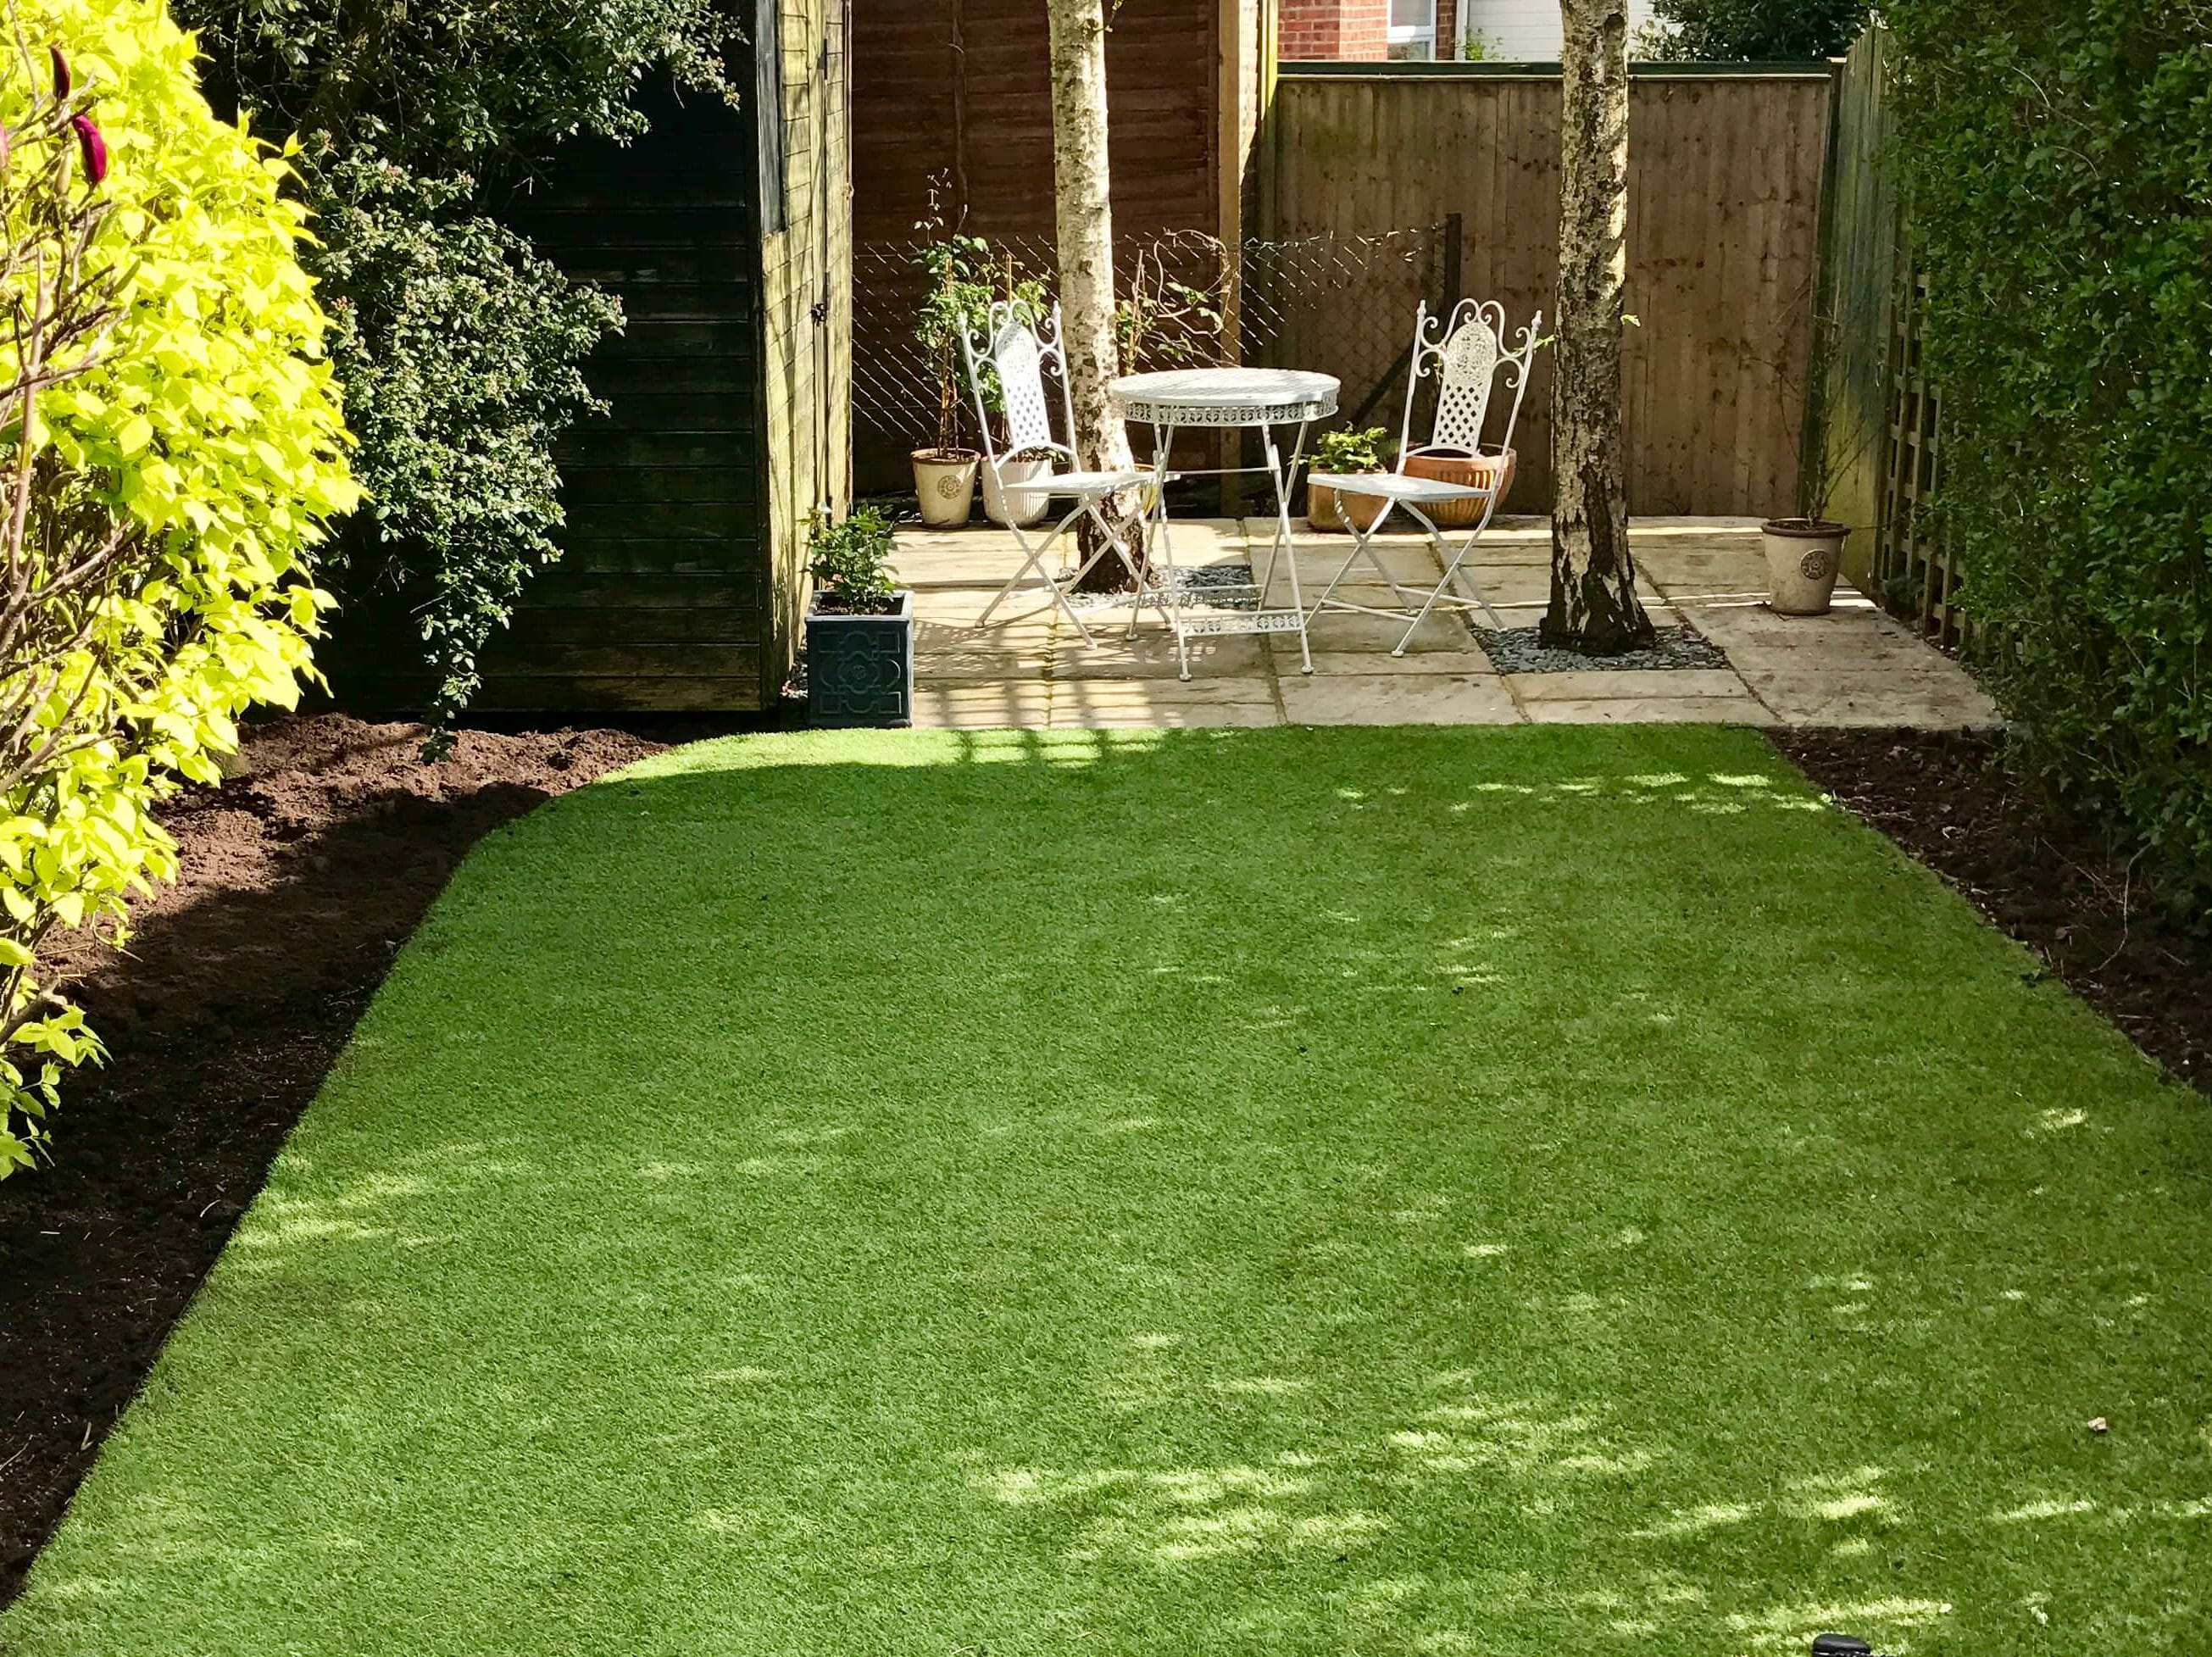 newly laid grass